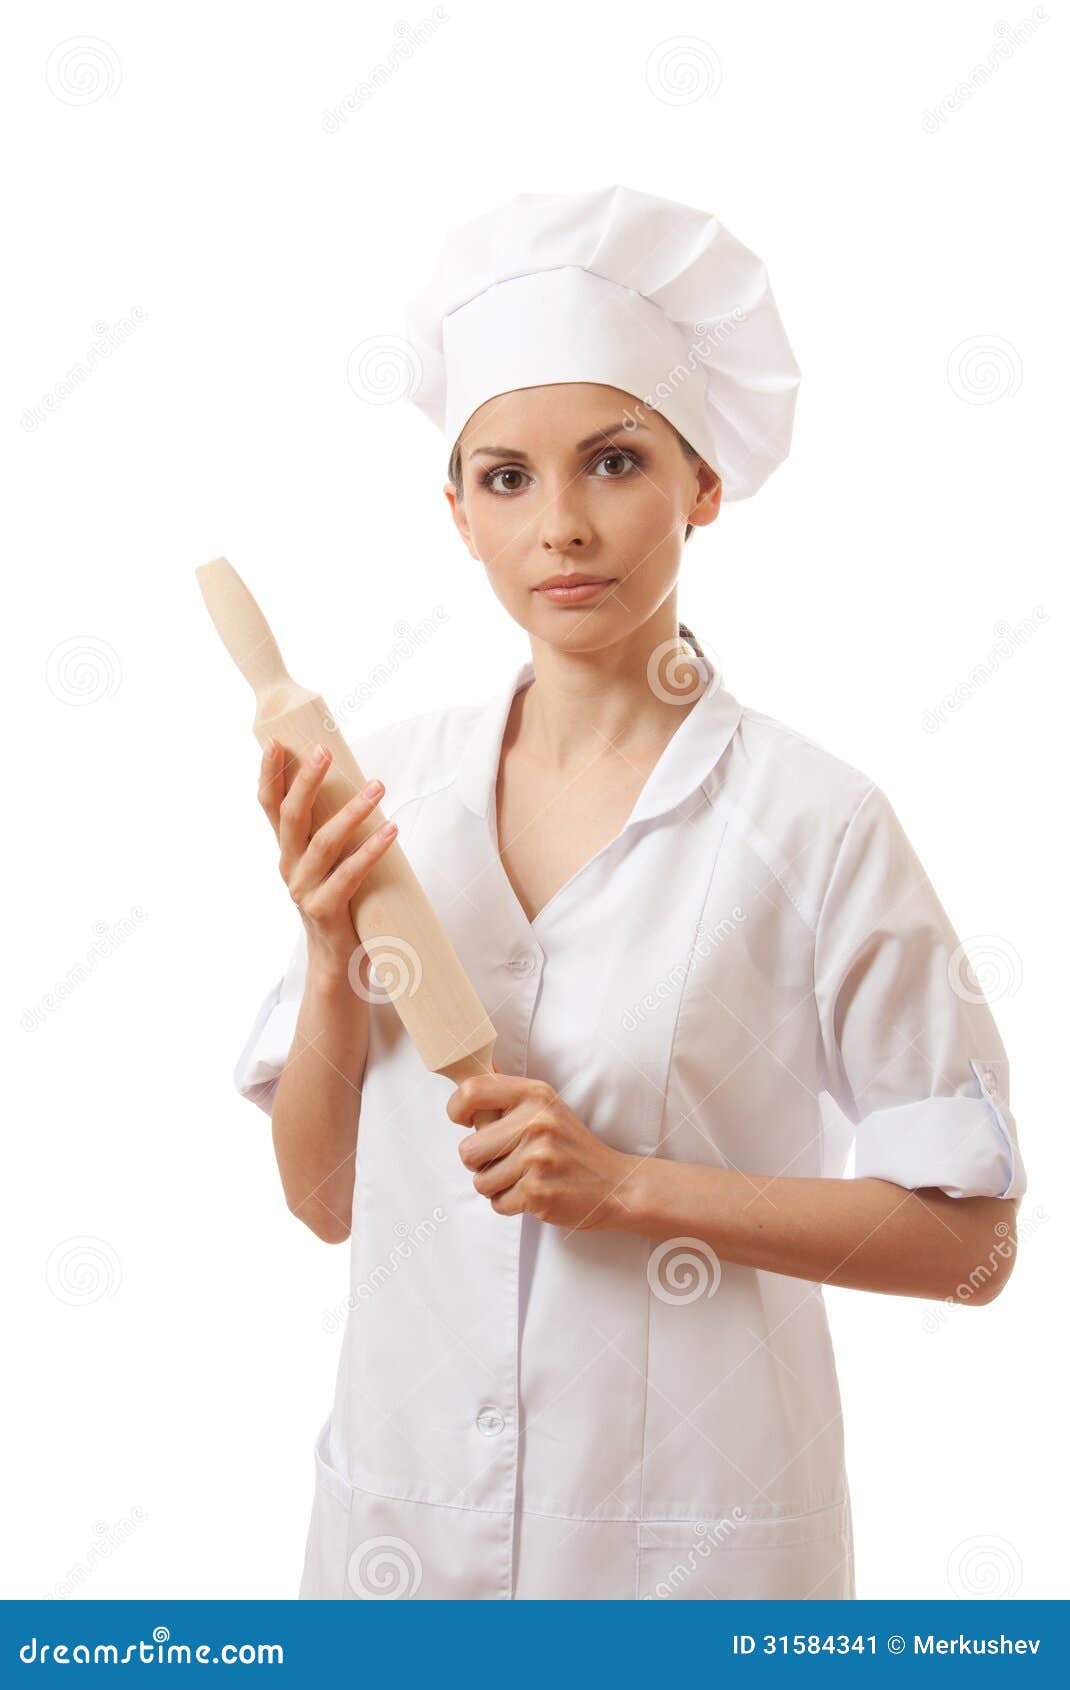 Baker / Chef Woman Holding Baking Rolling Pin Stock Image - Image of ...